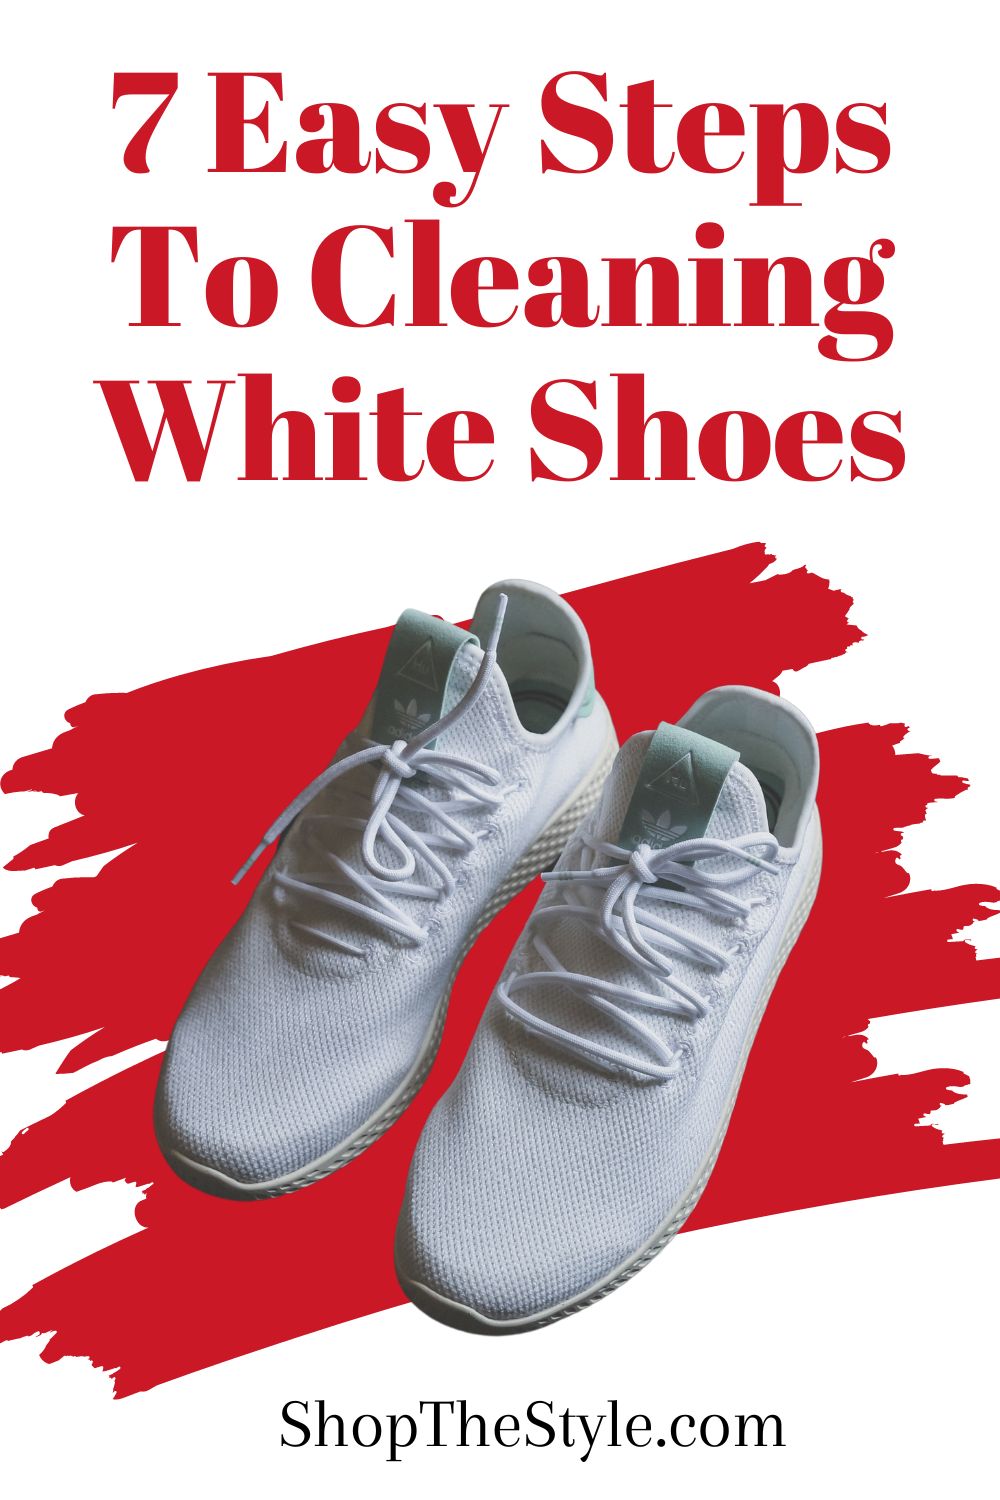 7 Easy Steps To Cleaning White Shoes